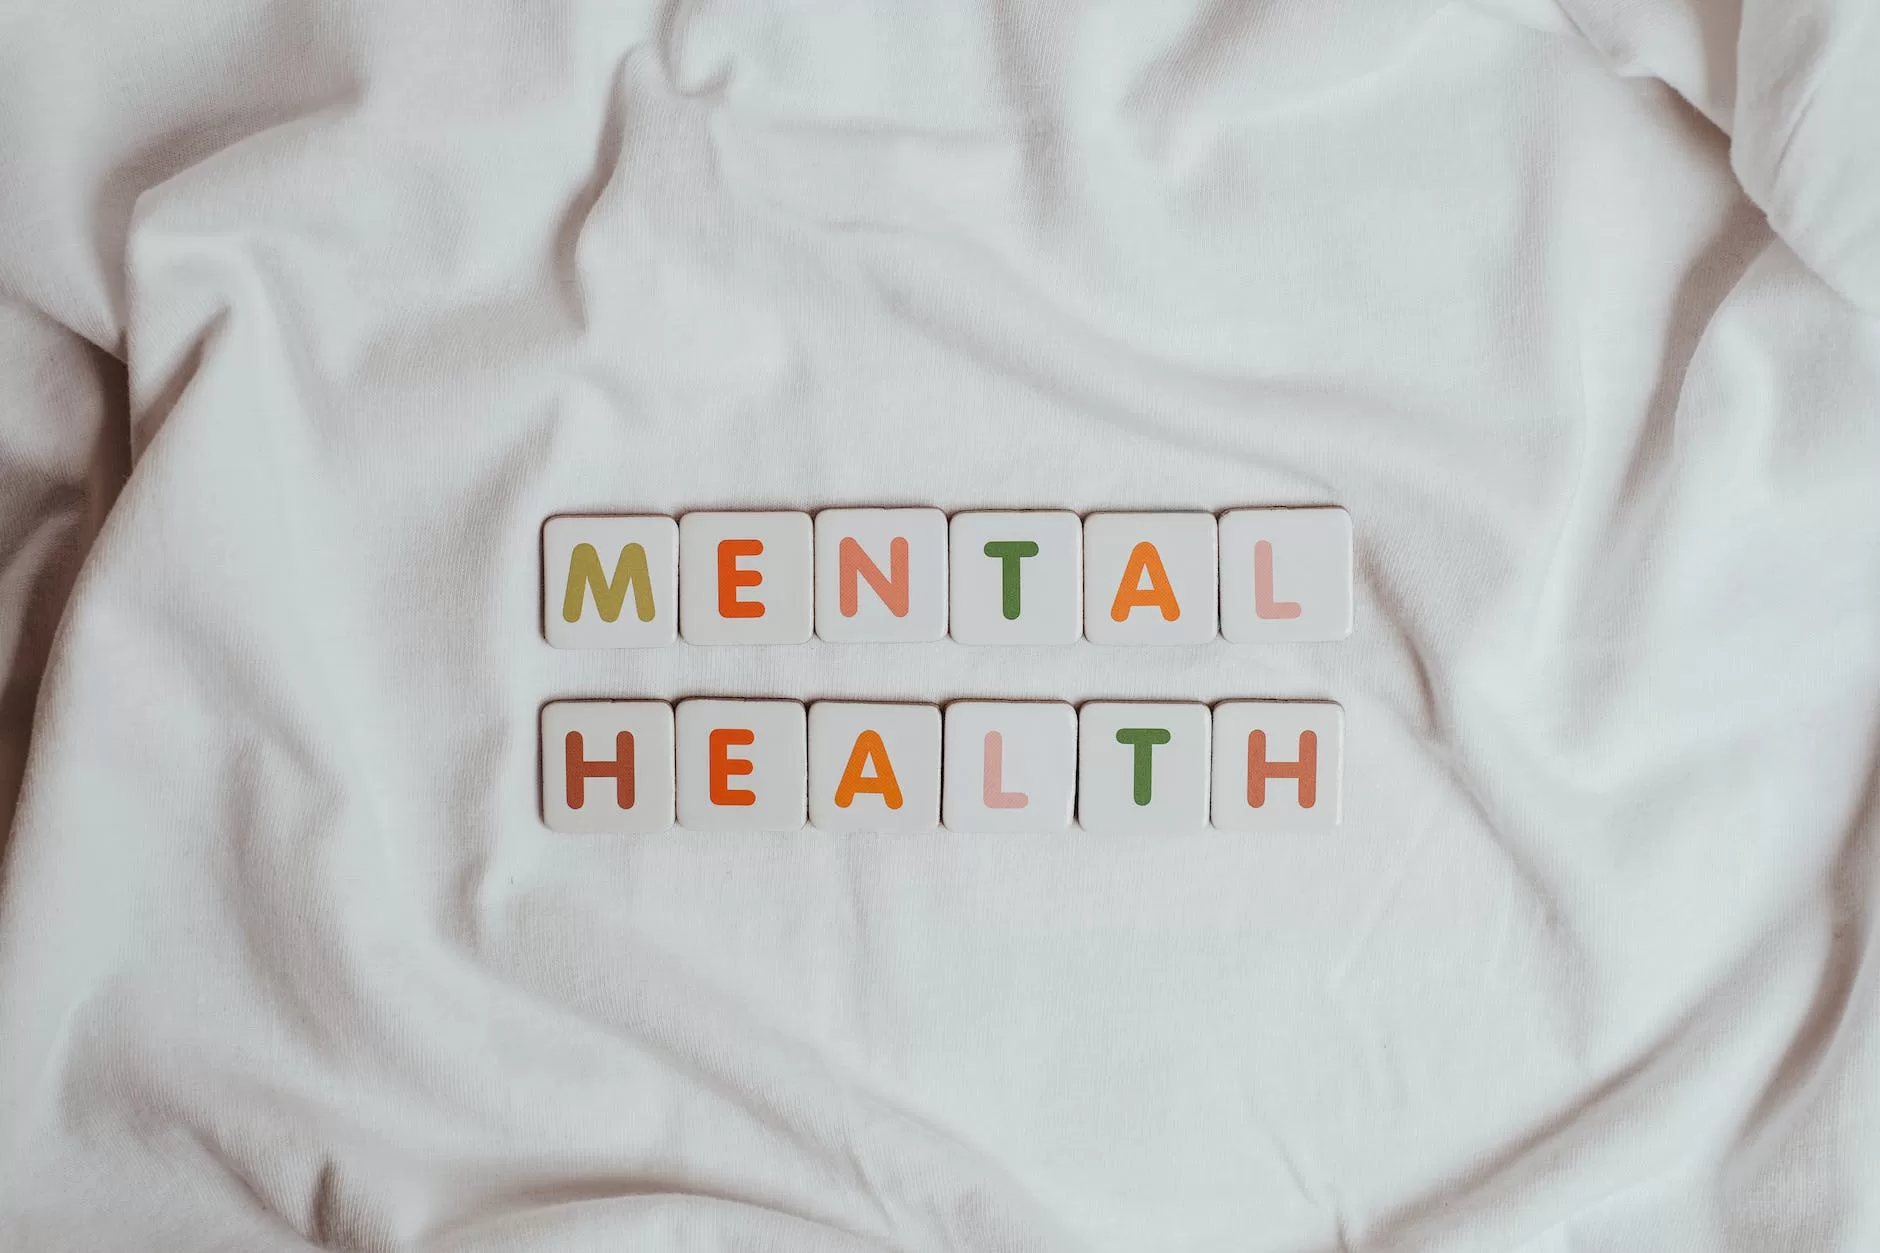 the phrase mental health on a sheet of fabric